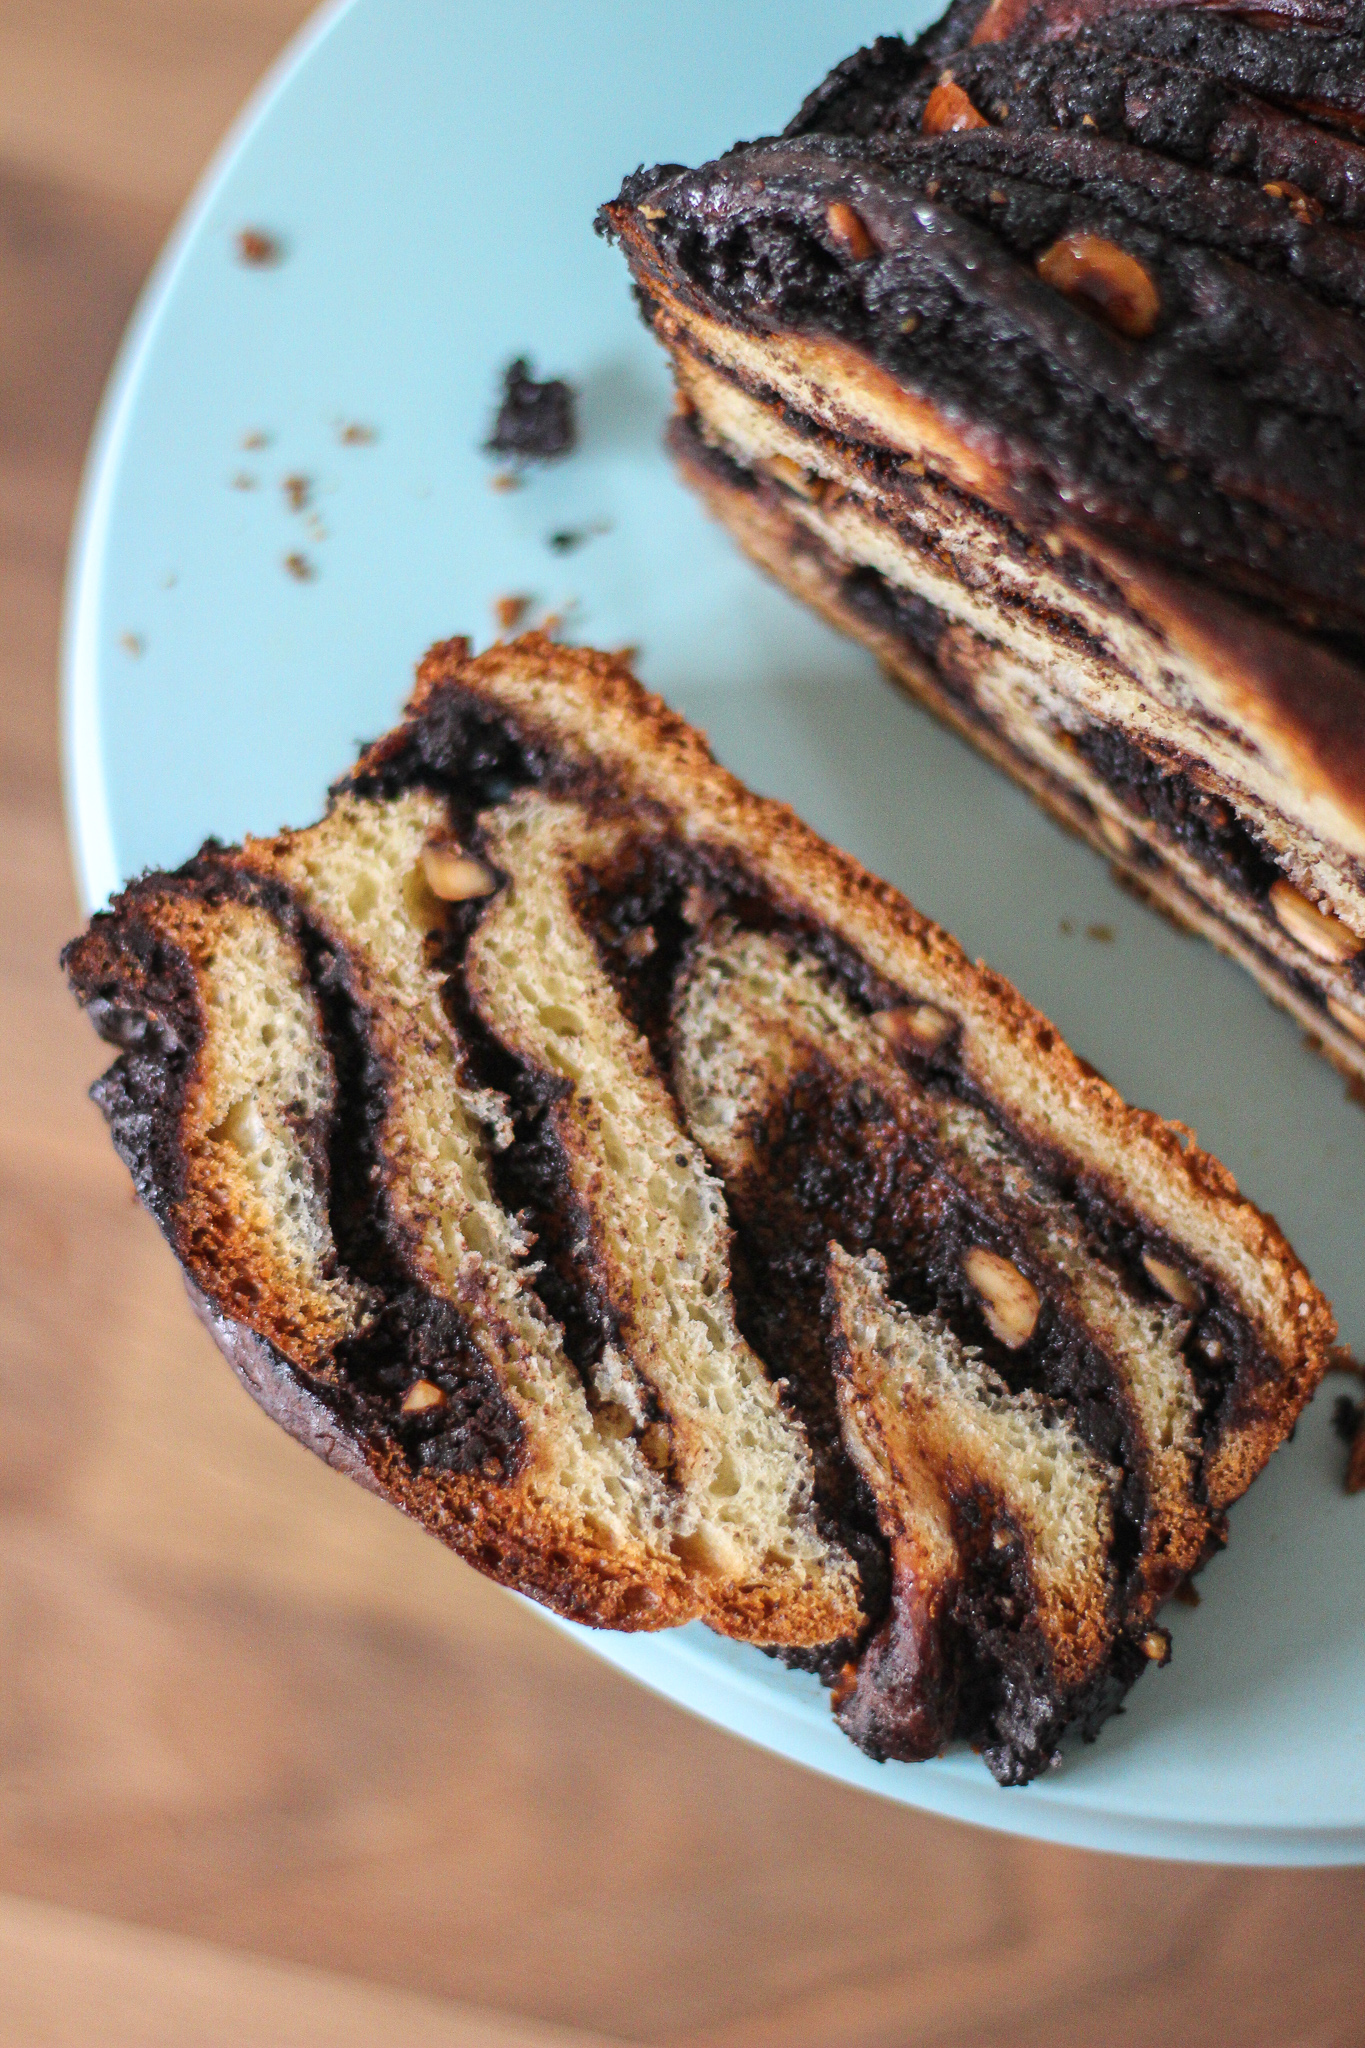 view from above of a slice of chocolate and hazelnut babka